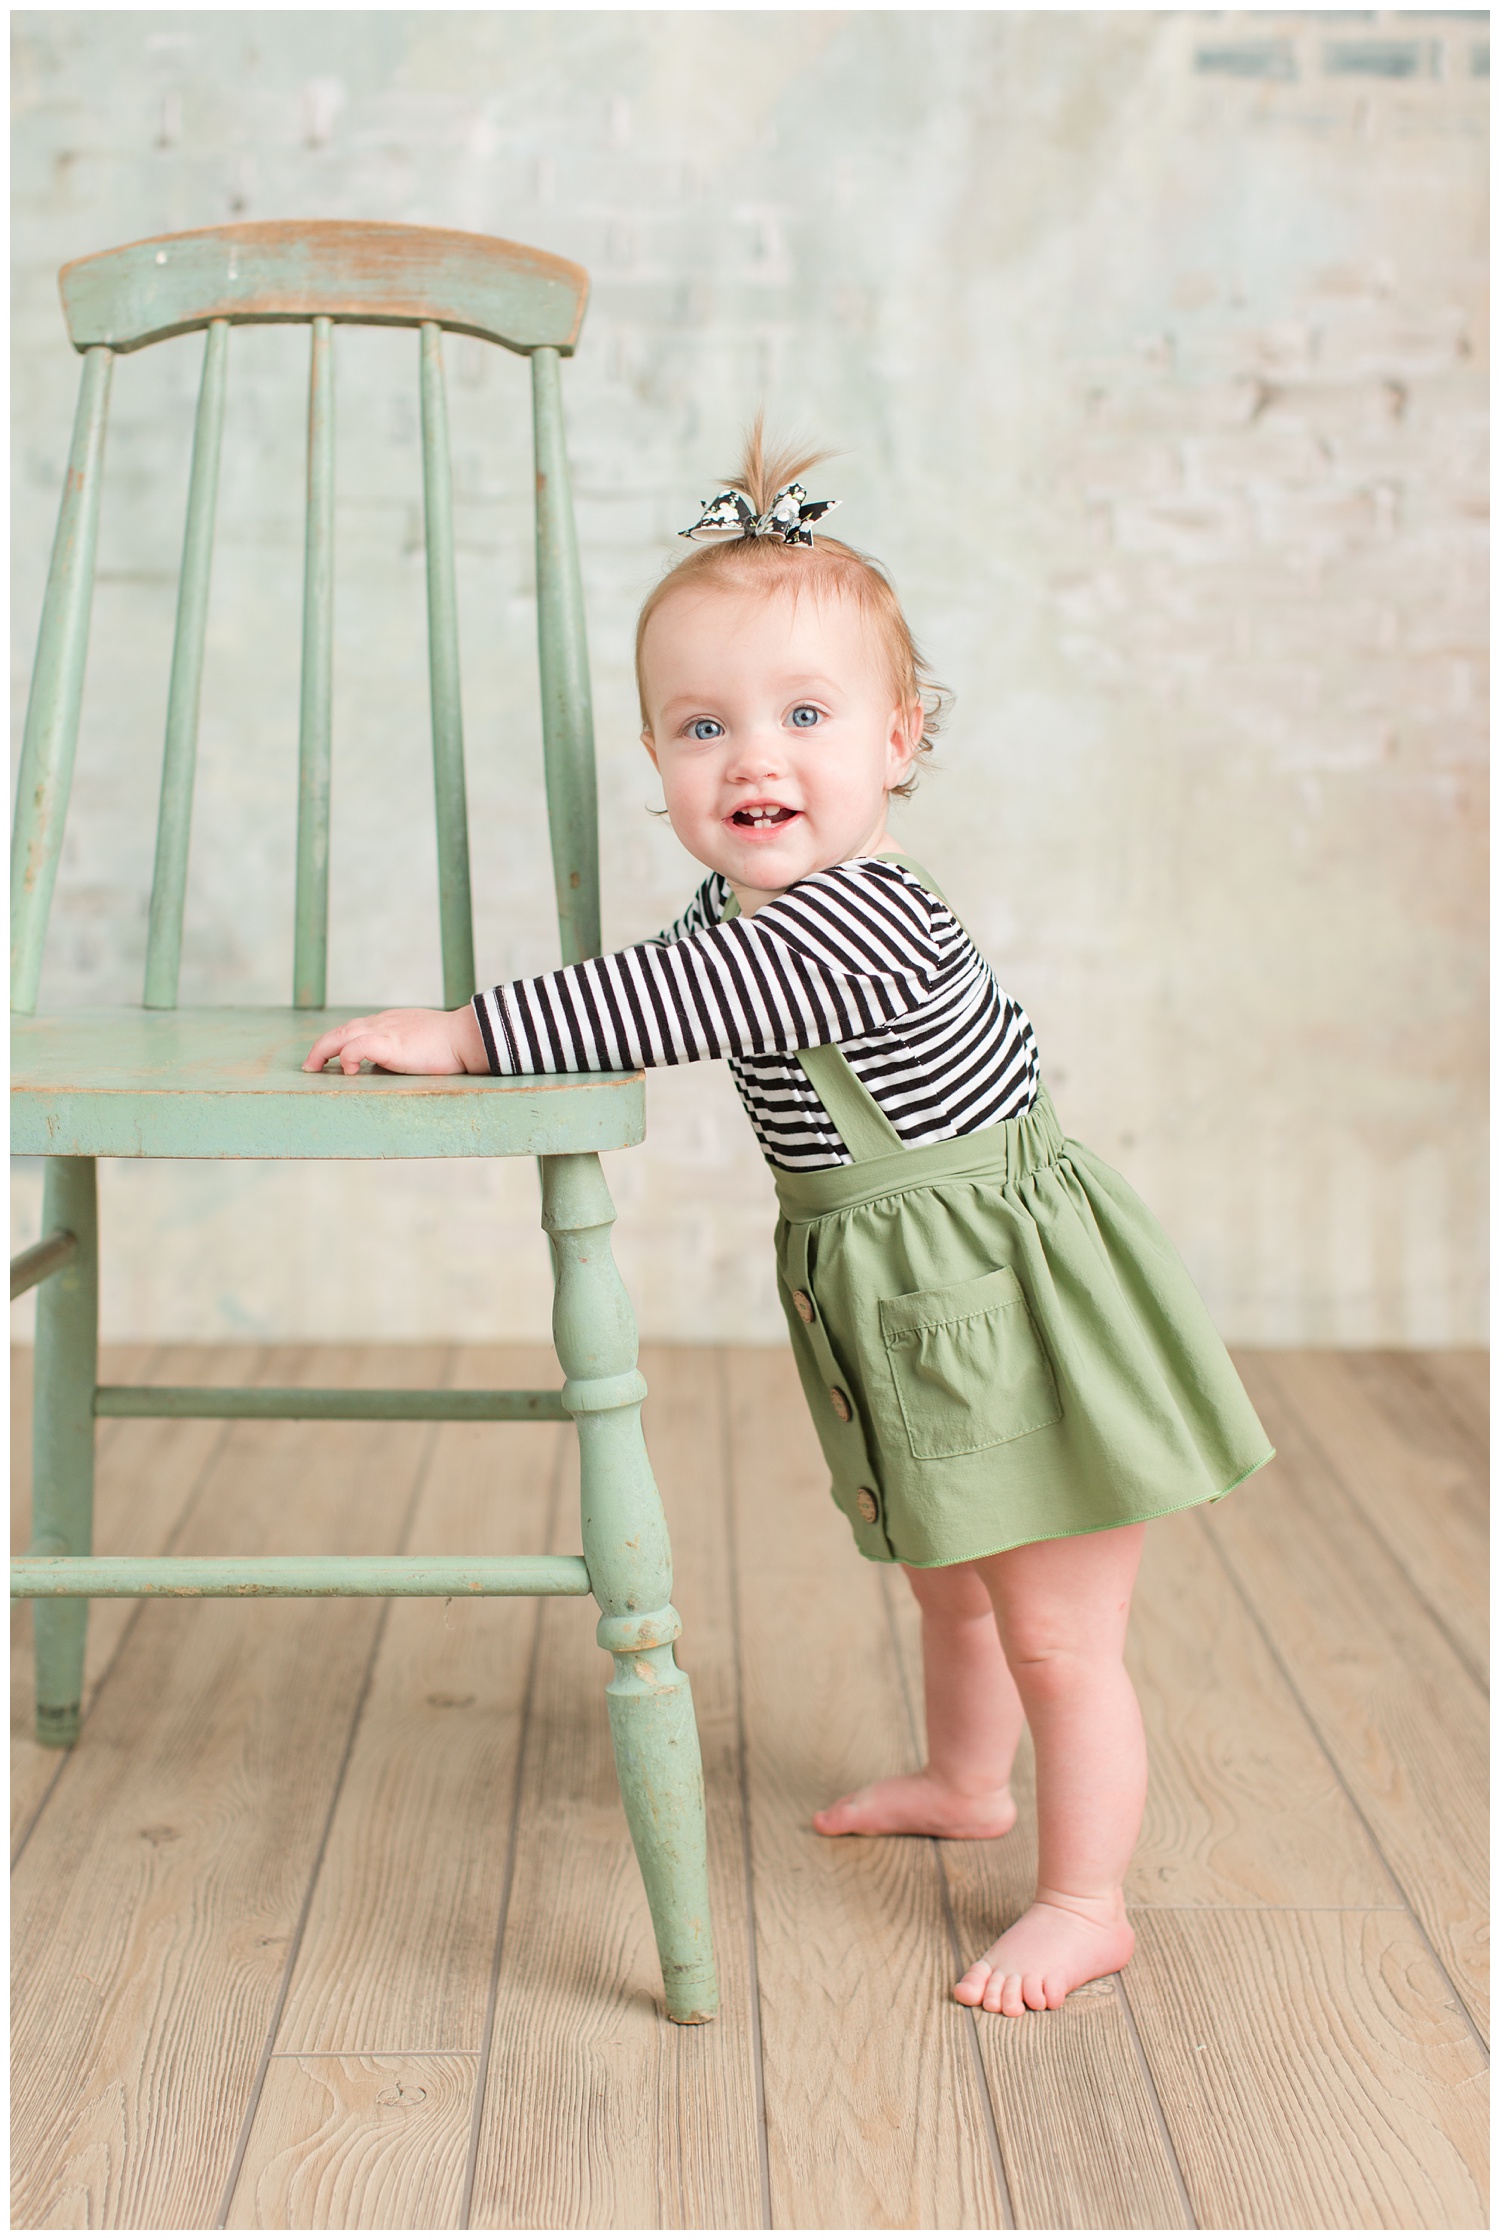 Baby Cara stands next to a rustic sage green chair wearing an sage green skirt and black and white striped shirt | CB Studio